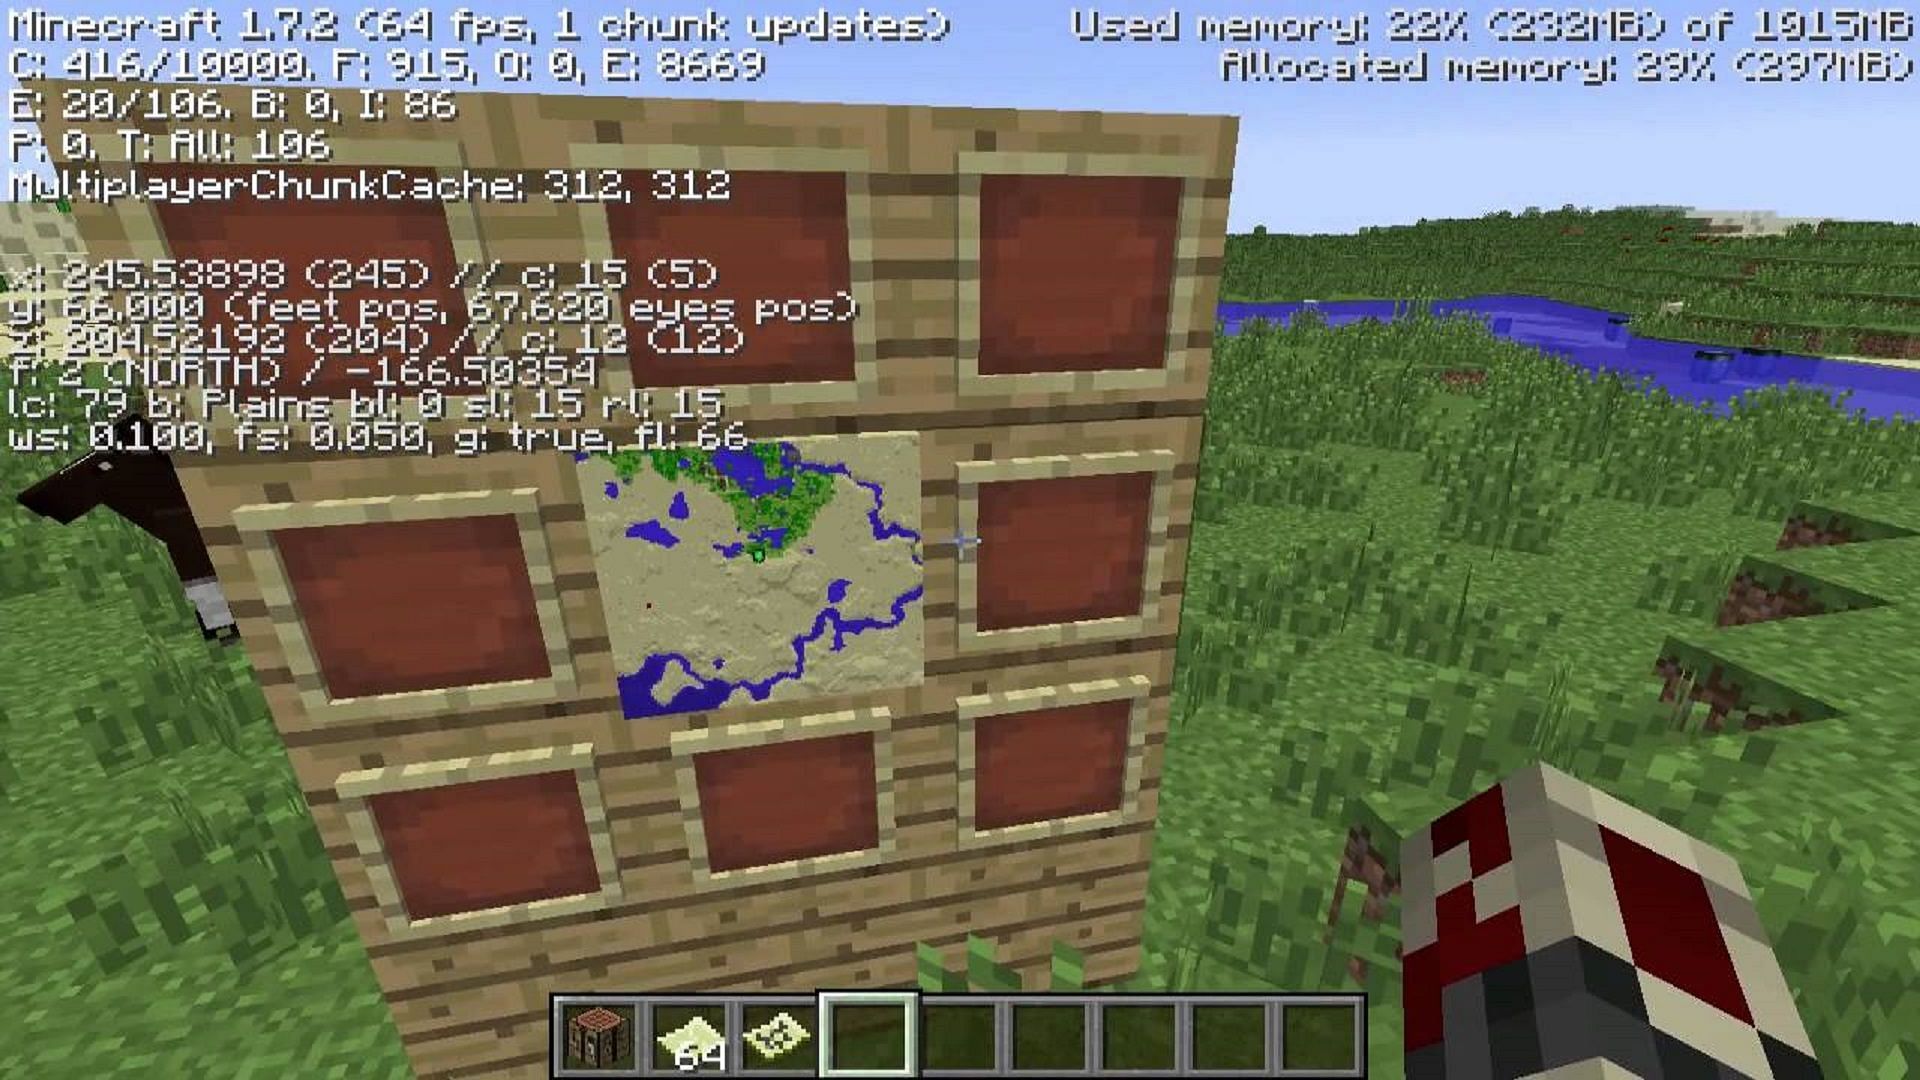 A connected wall map dating back to Minecraft version 1.7.2 (Image via jDantastic/YouTube)